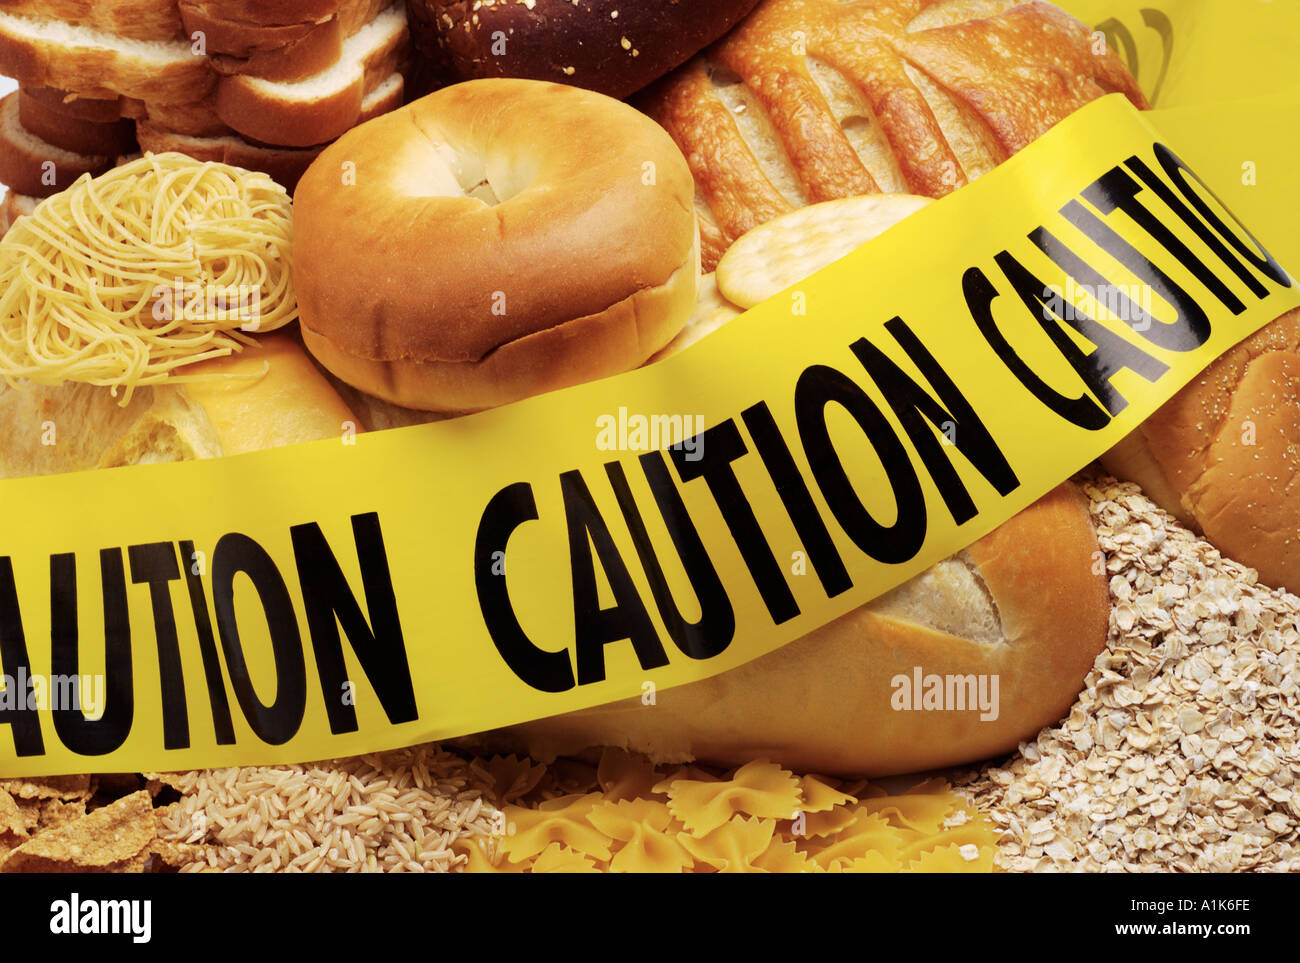 Low carbohydrate diet Background of bread cereal products surrounded with caution tape Stock Photo